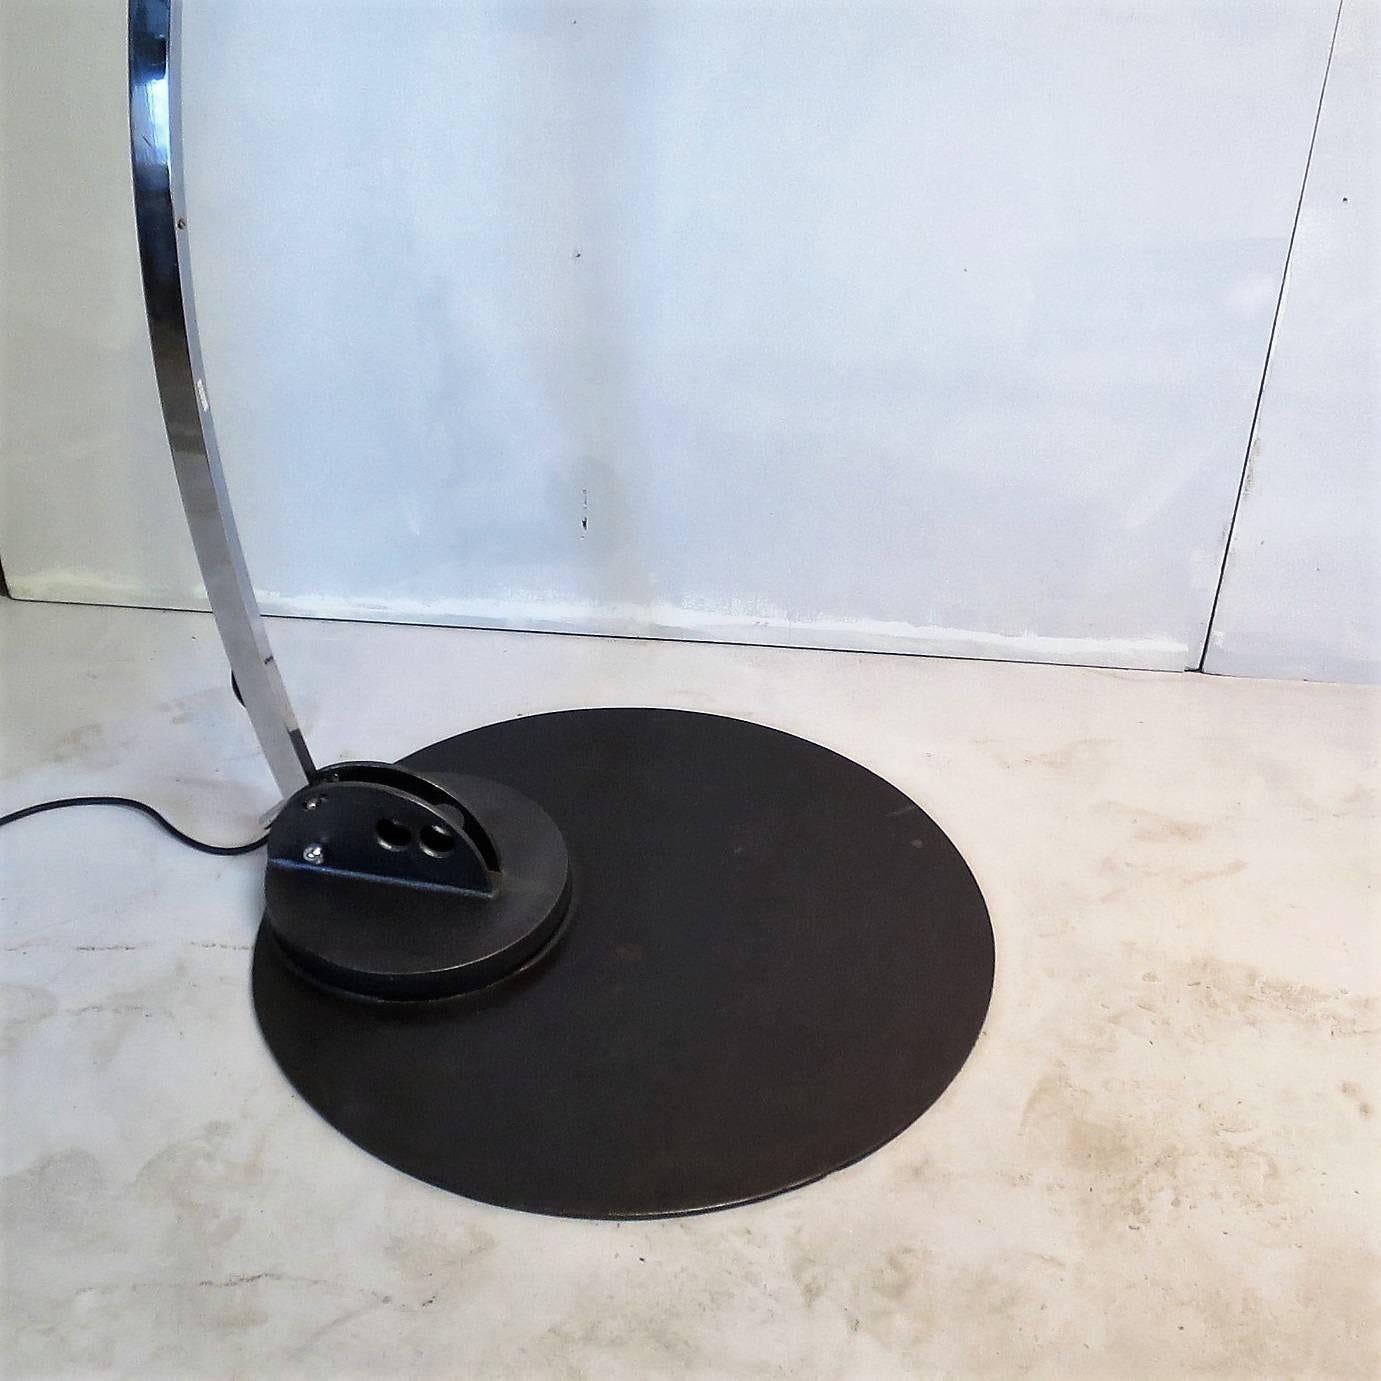 Unusual curved design for this chrome floor lamp, the curved arm is extendable and the round top is flexible upper and down as well.
Very good lightening. Eight lights.
Wired for US
Eight bulbs.